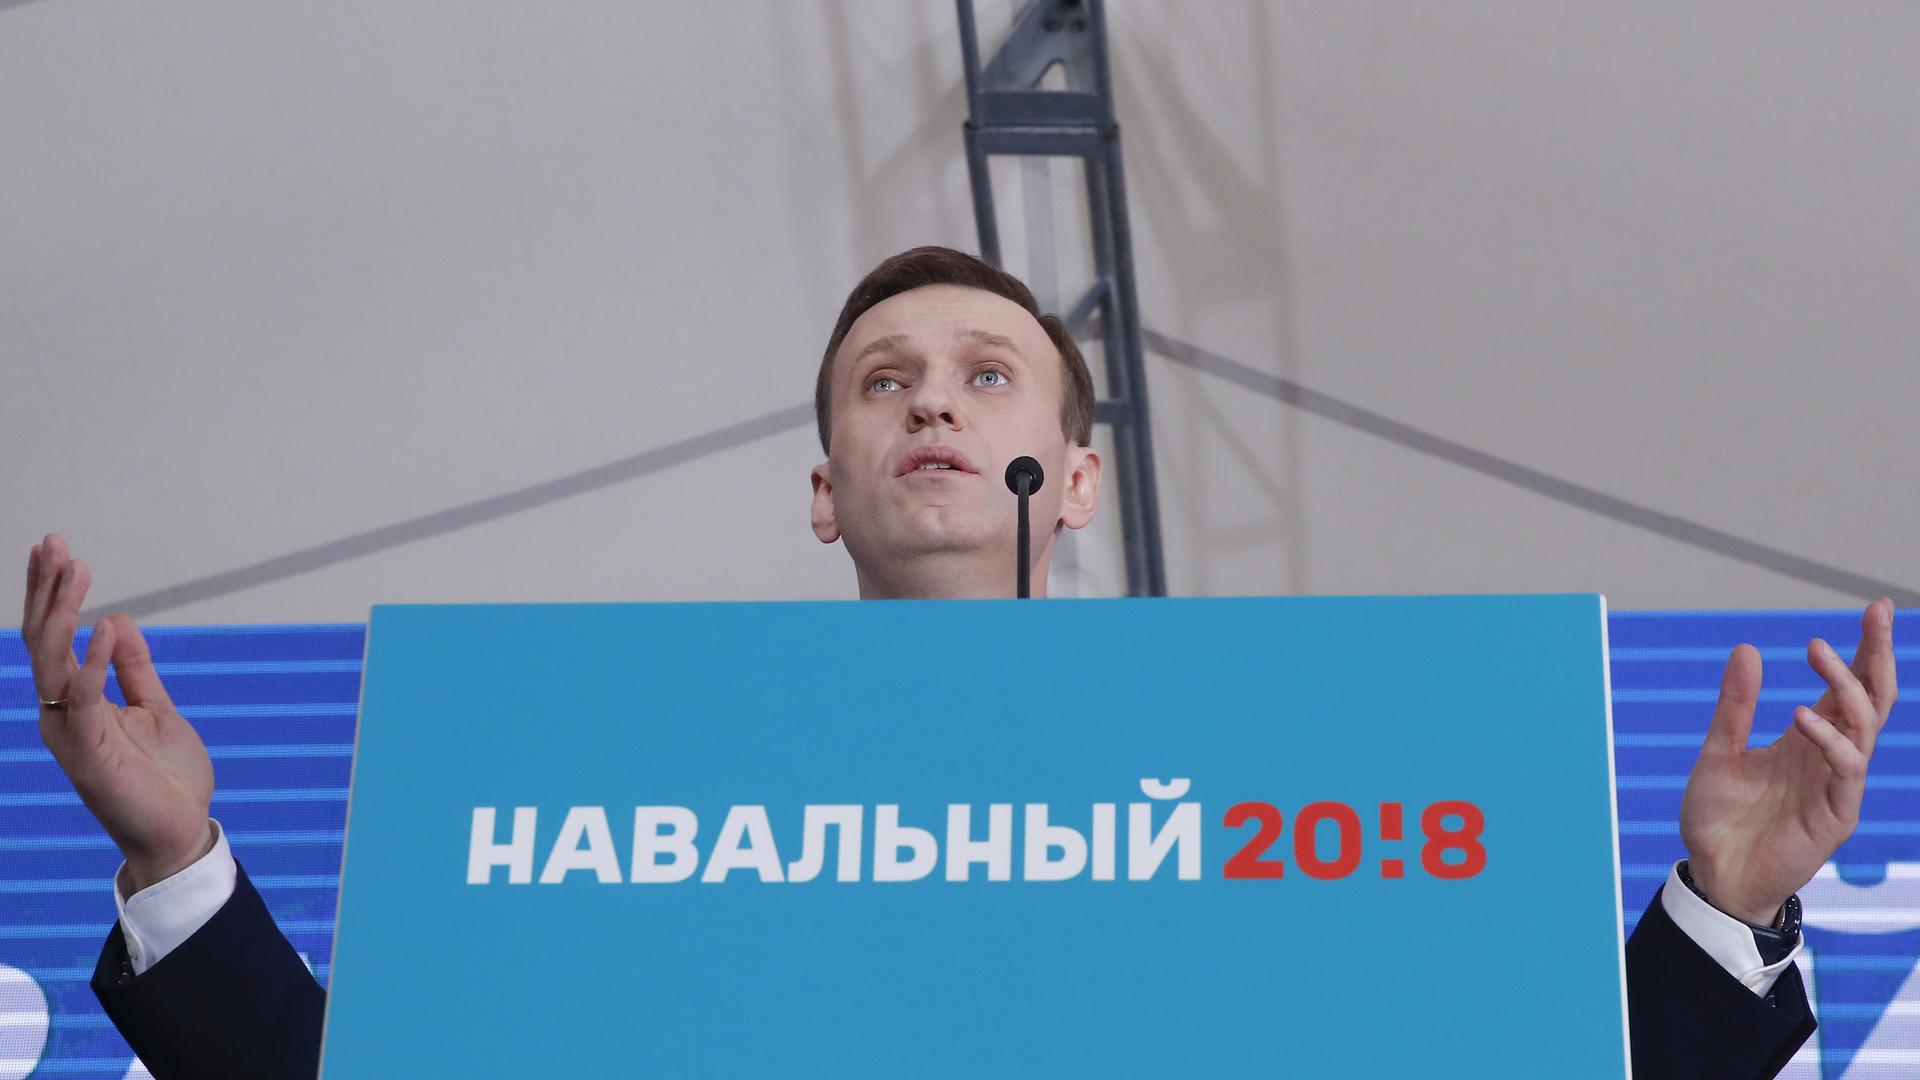 Alexei Navalny speaks behind a podium covered with a blue sign with red lettering in Russian and holds his hands up as he looks out on the crowd.